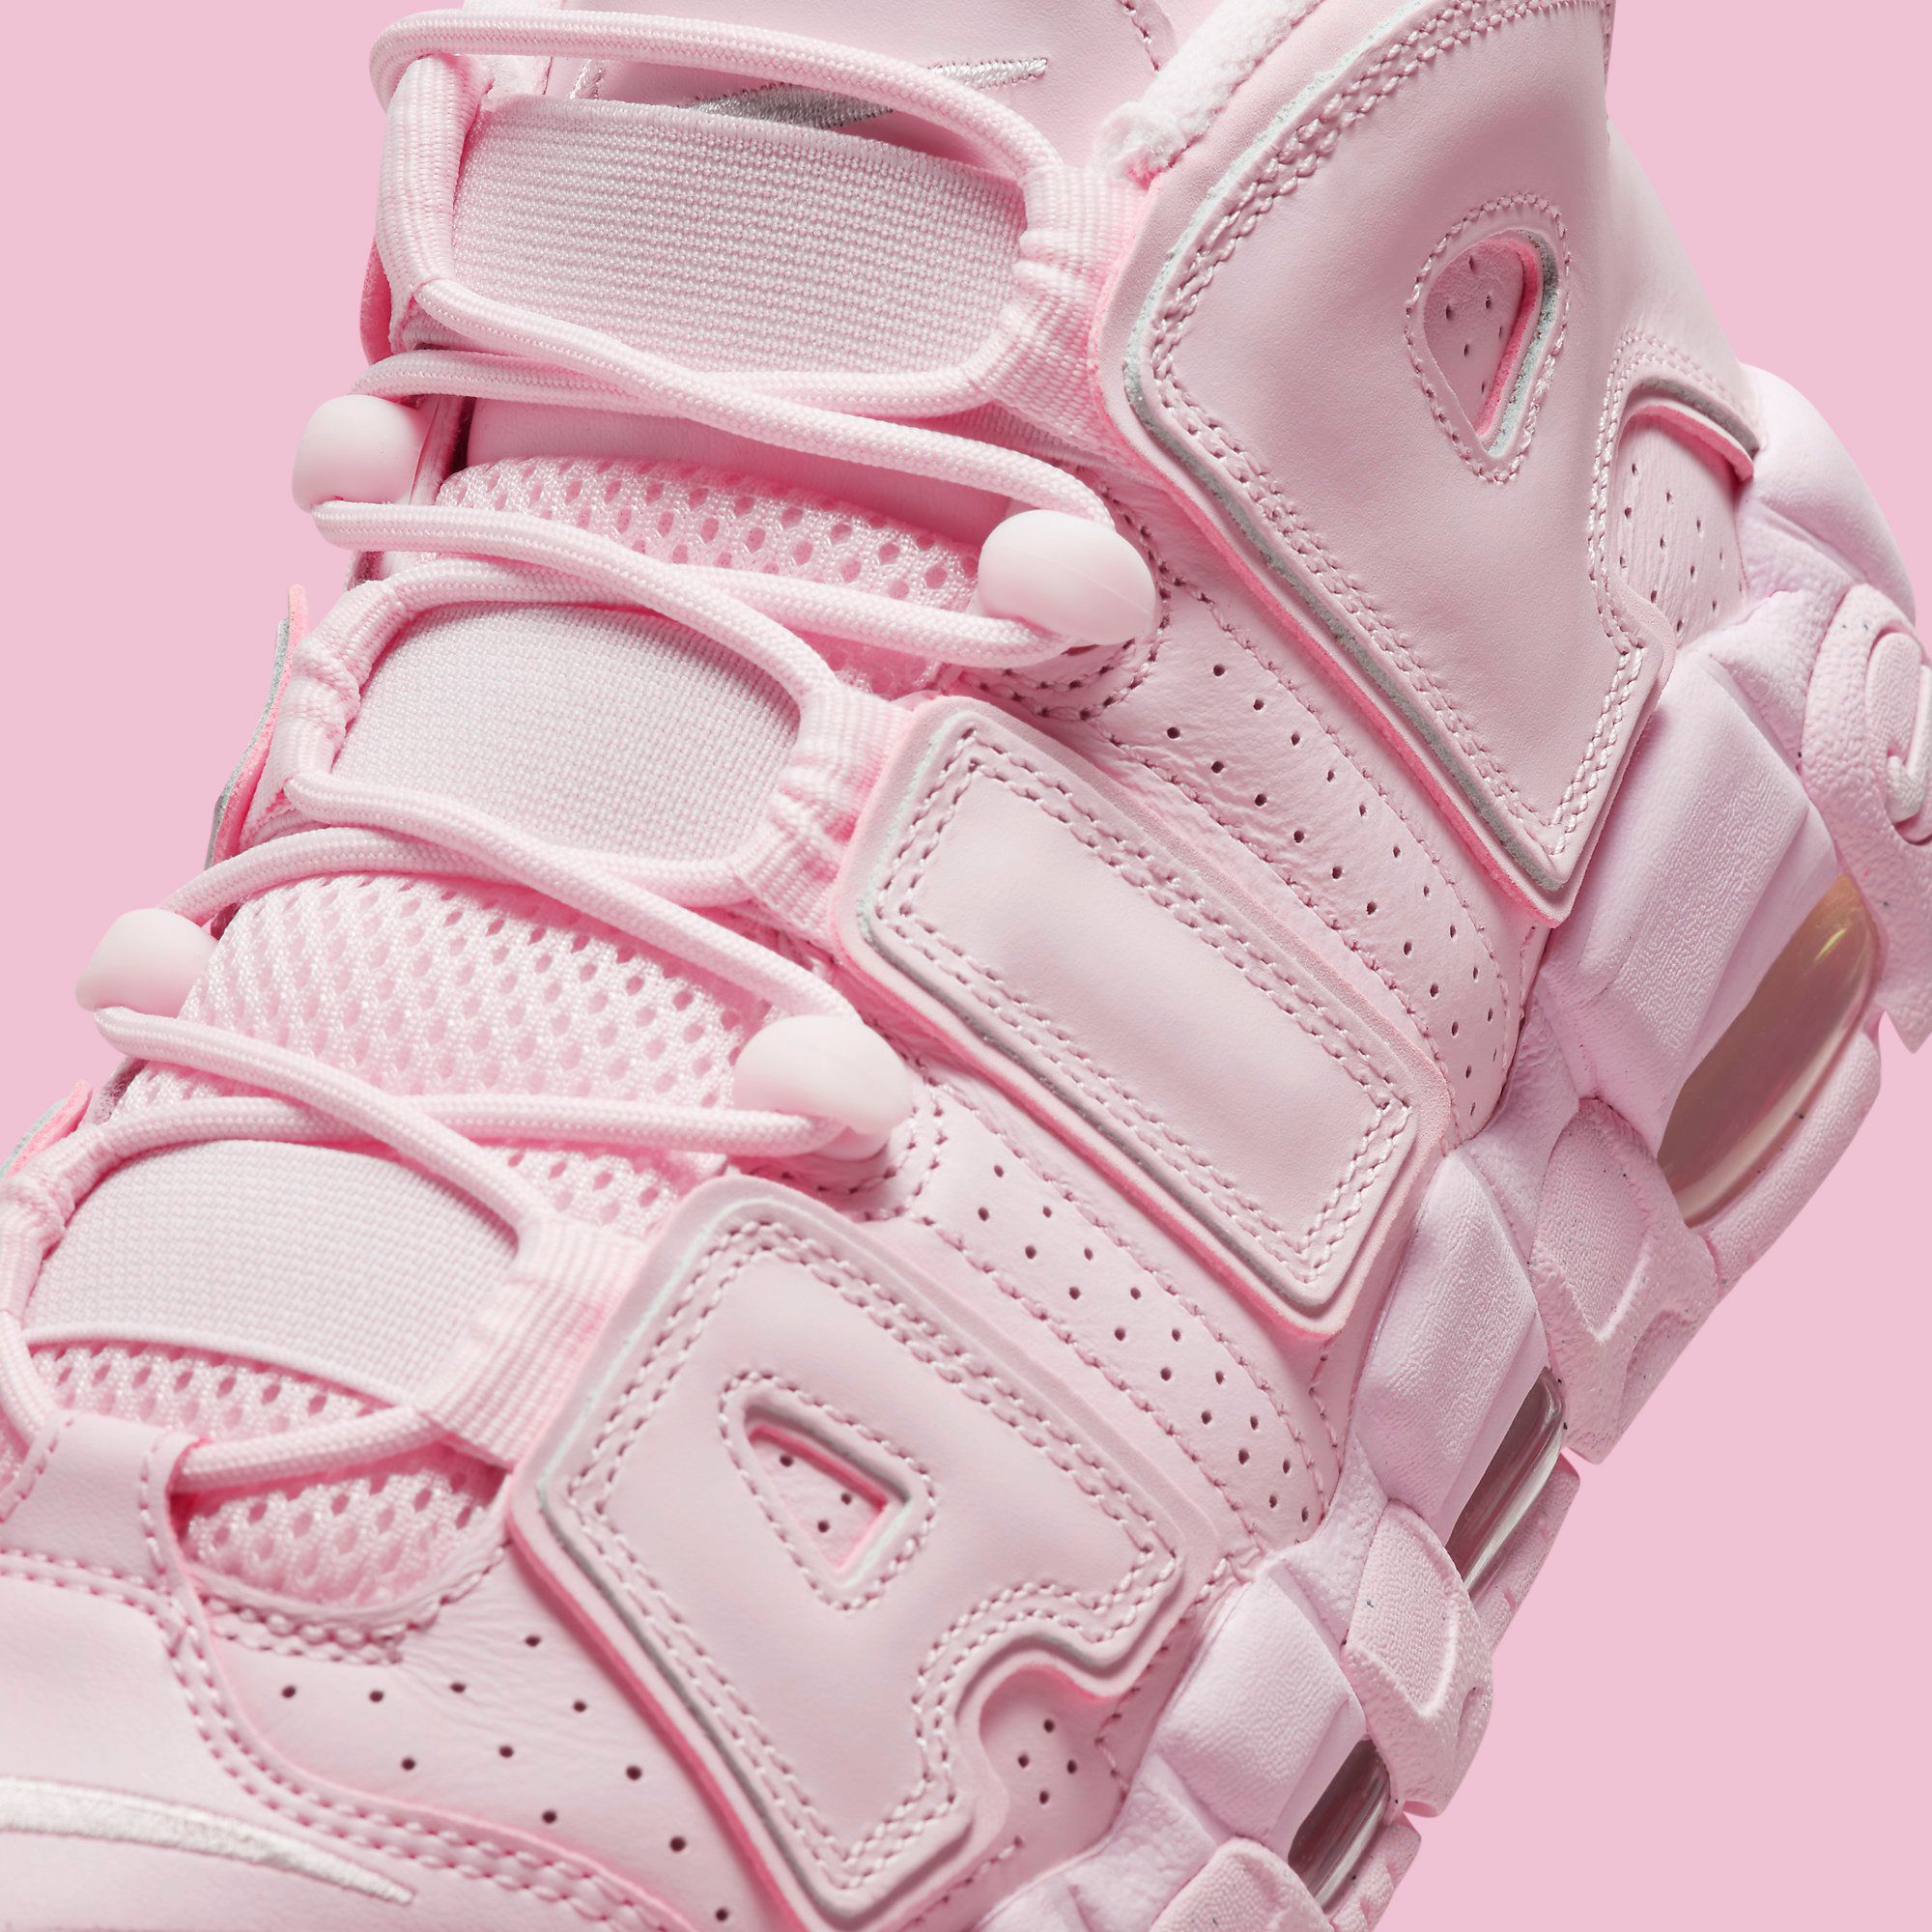 Nike Gives the More Uptempo a 